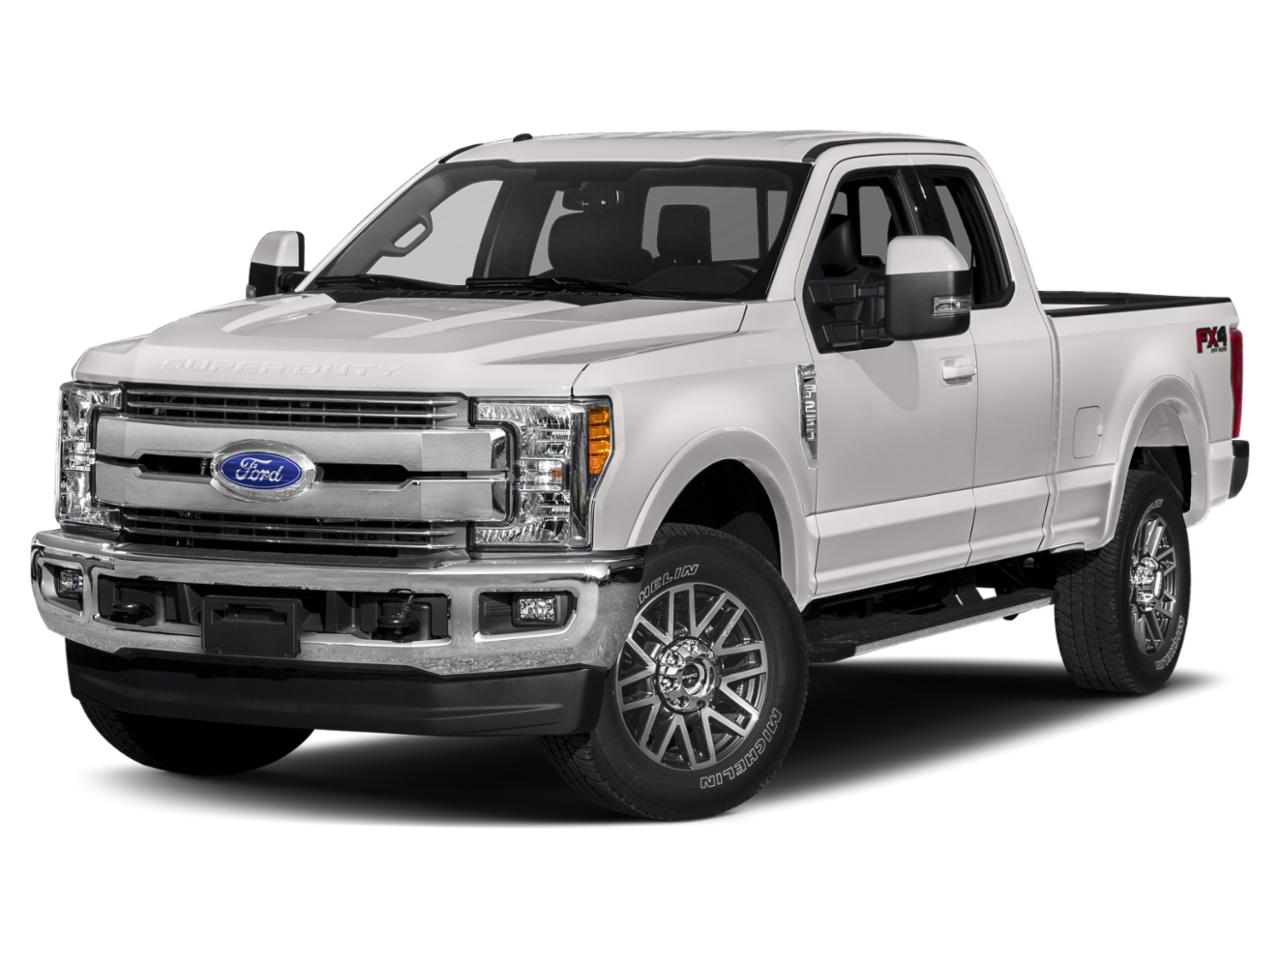 2019 Ford Super Duty F-250 SRW Vehicle Photo in Stephenville, TX 76401-3713